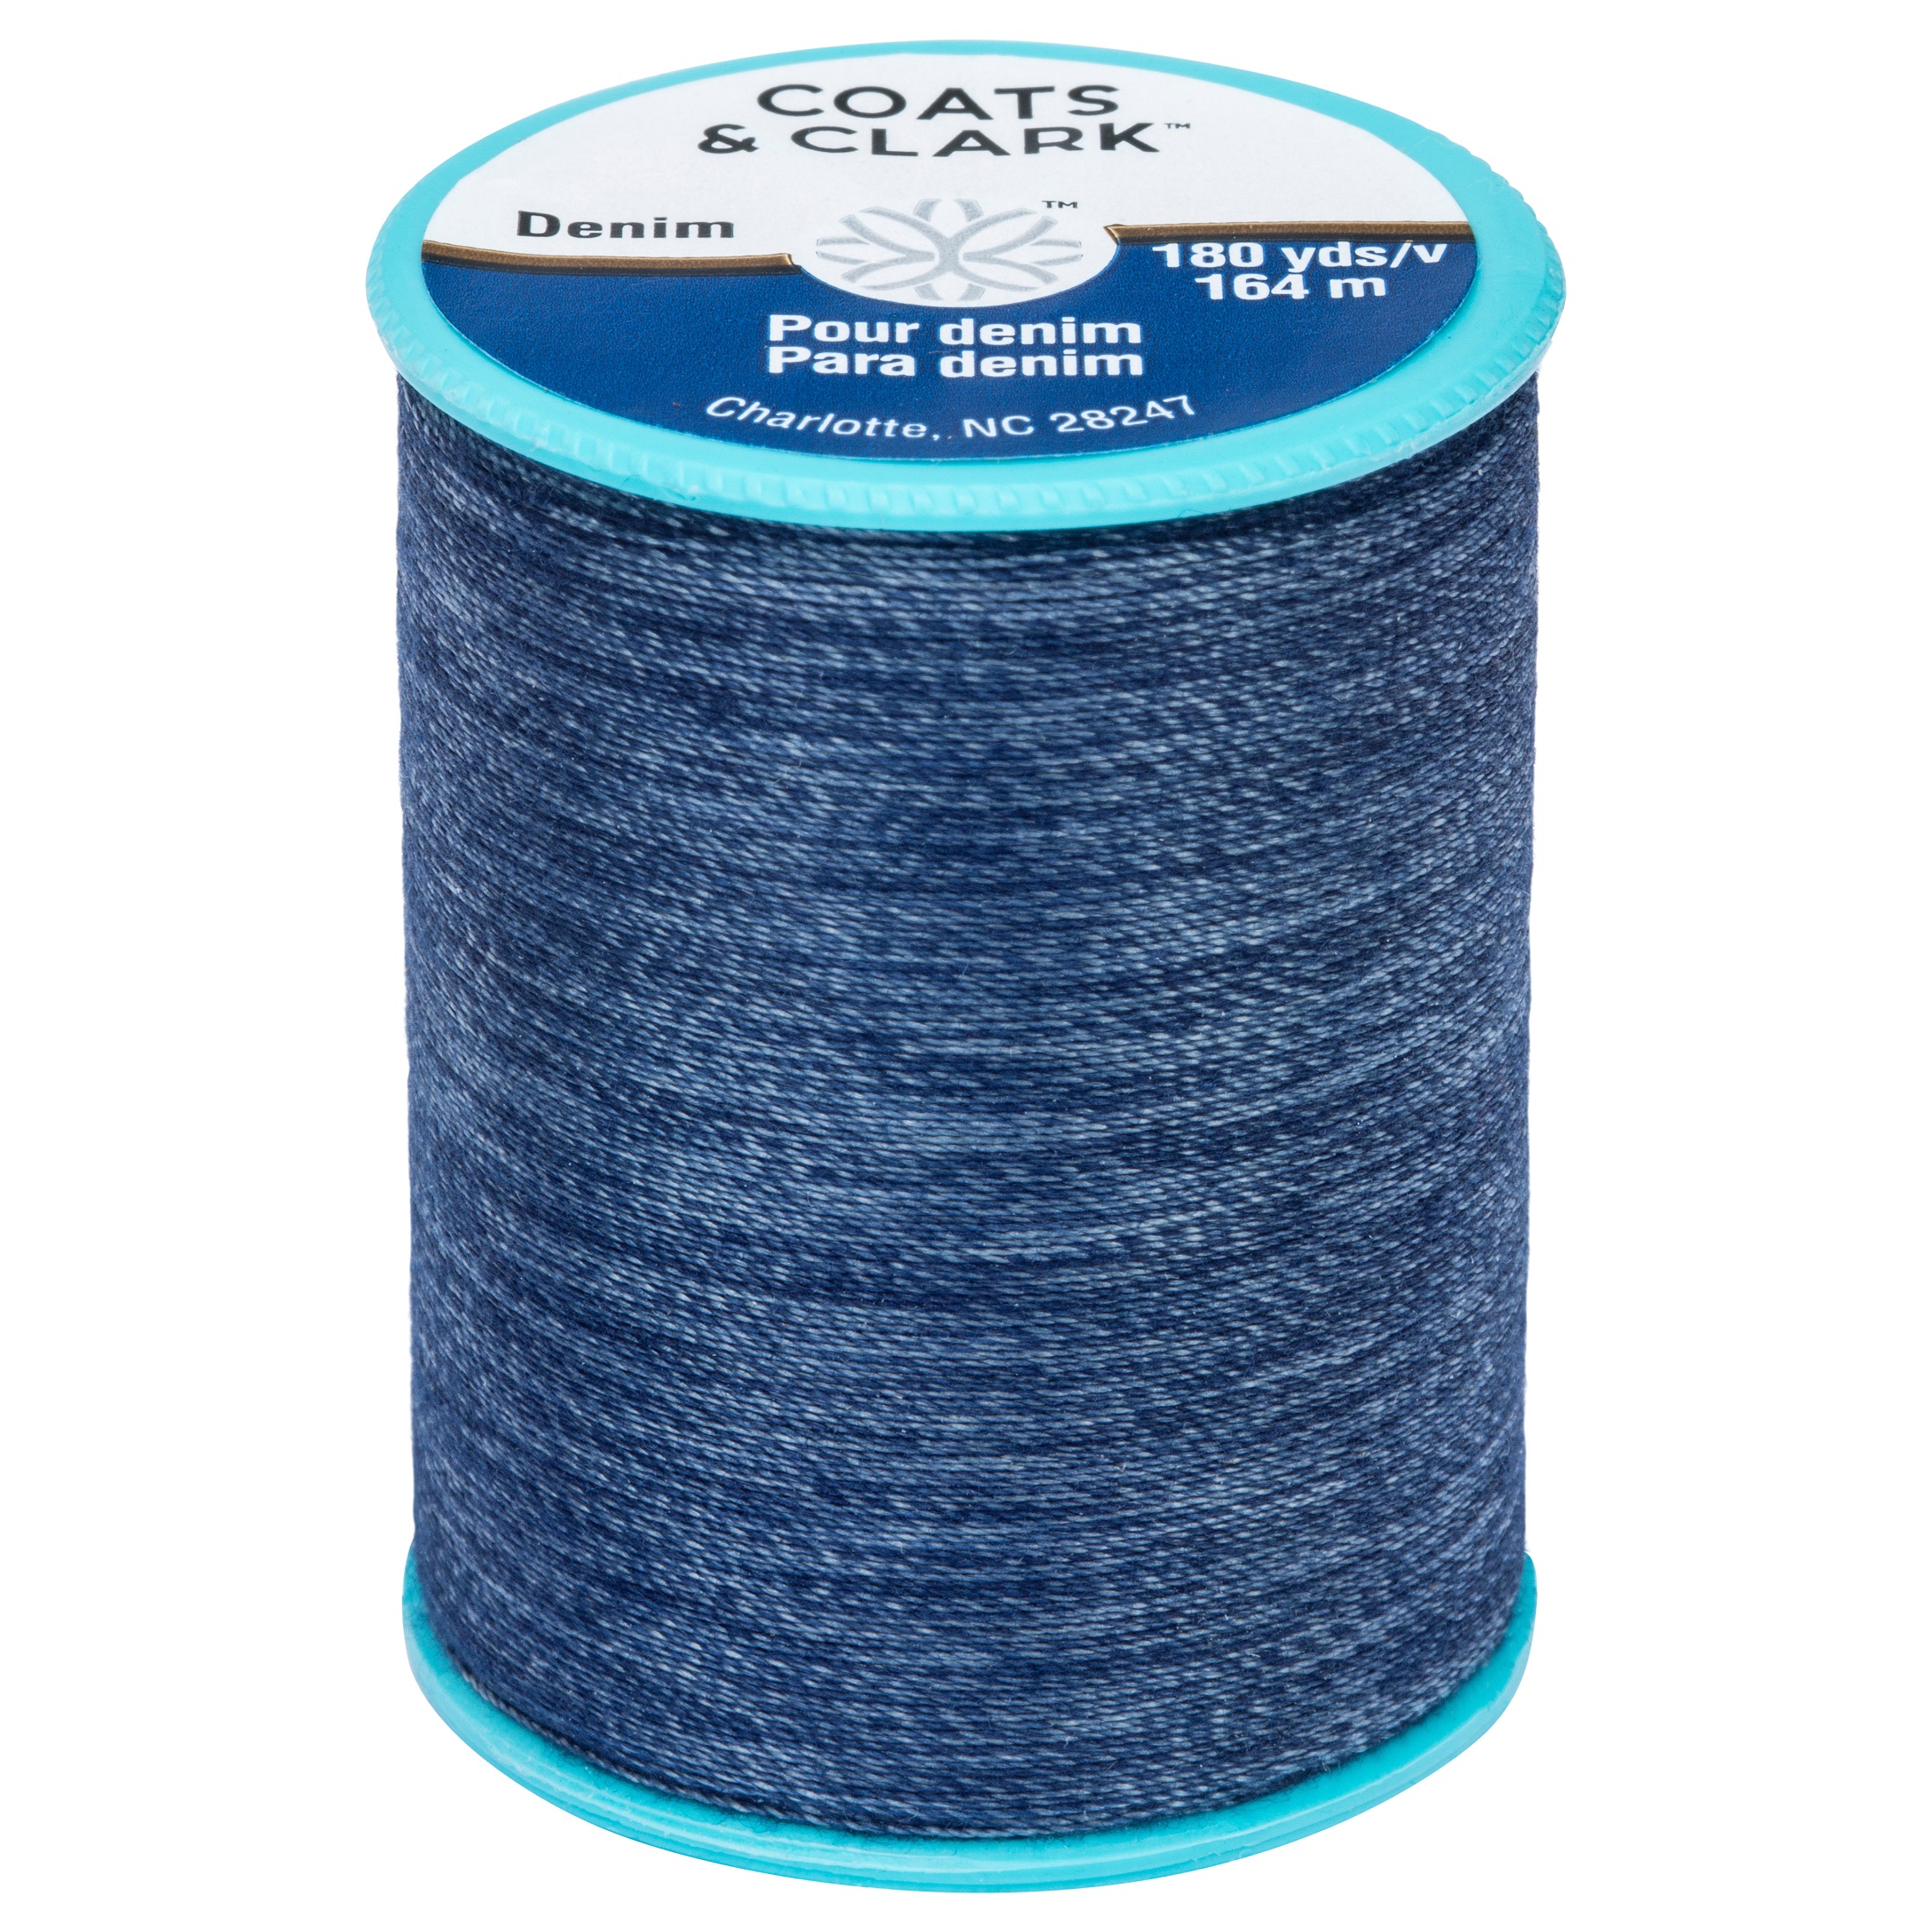 Coats & Clark Dual Duty Denim Faded Blue Cotton/Polyester Thread, 180 Yards/164 meters - image 1 of 2